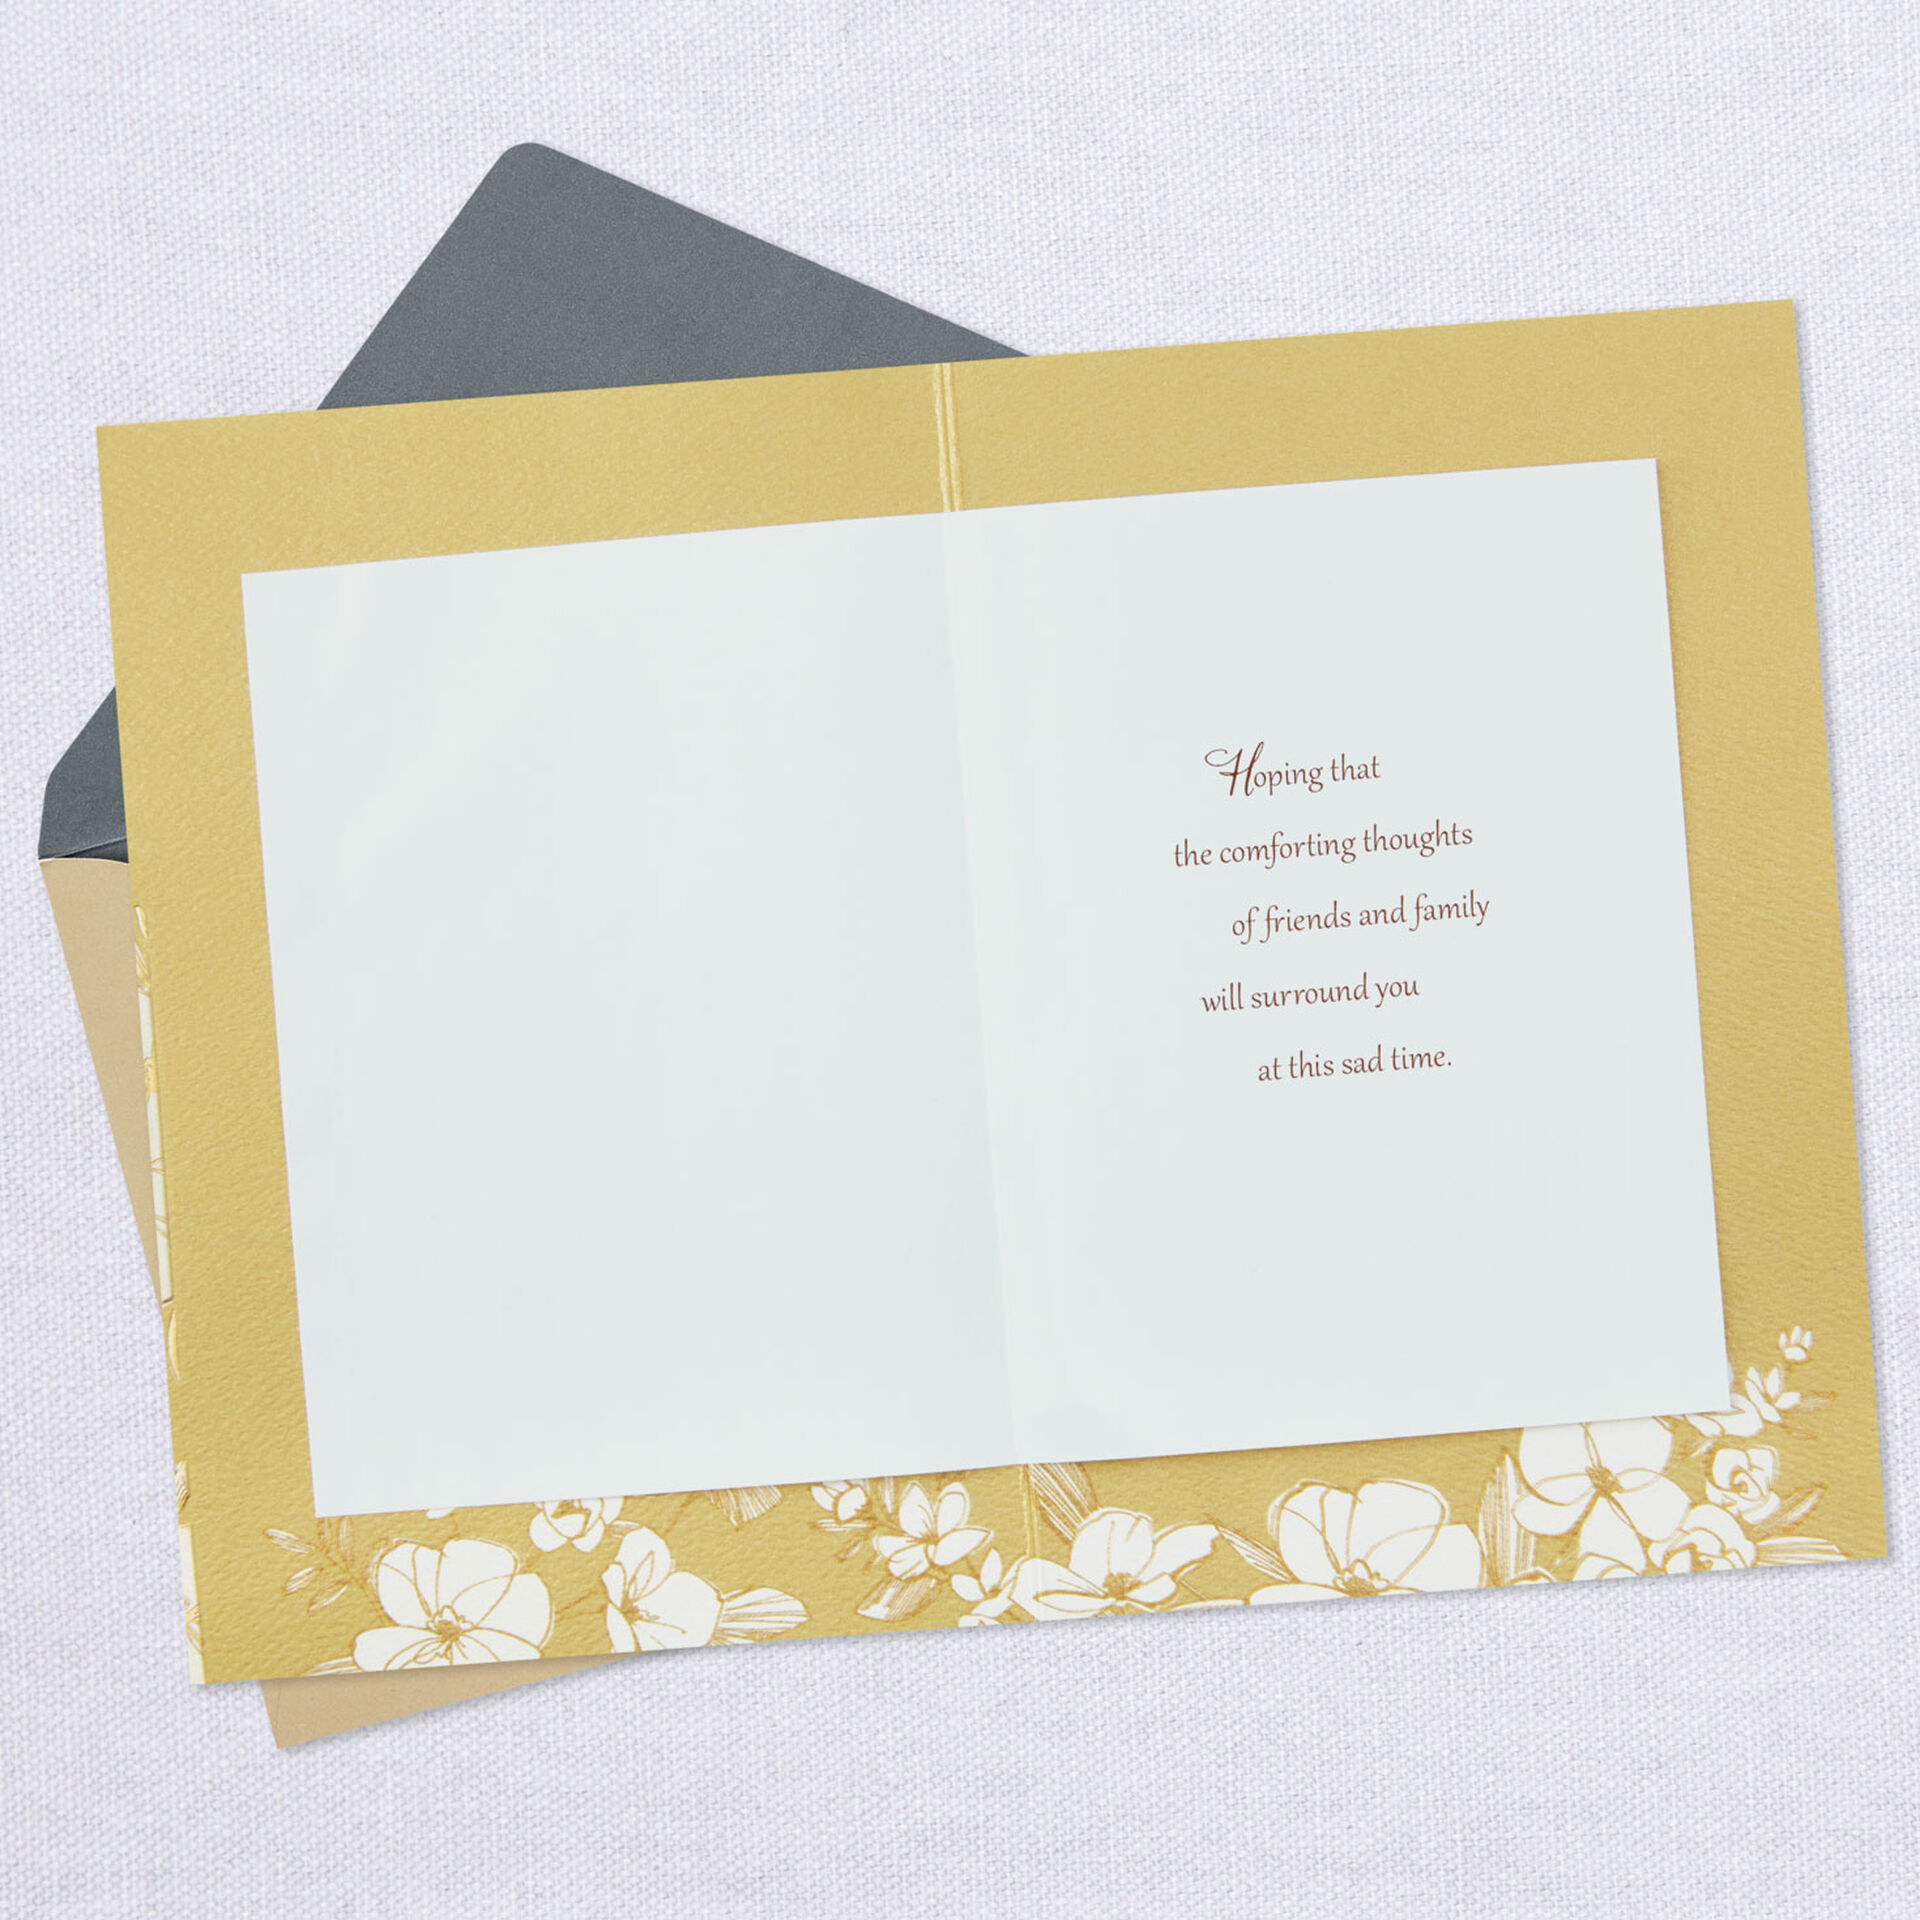 Scattered-Flowers-Comforting-Thoughts-Sympathy-Card_559S2518_03